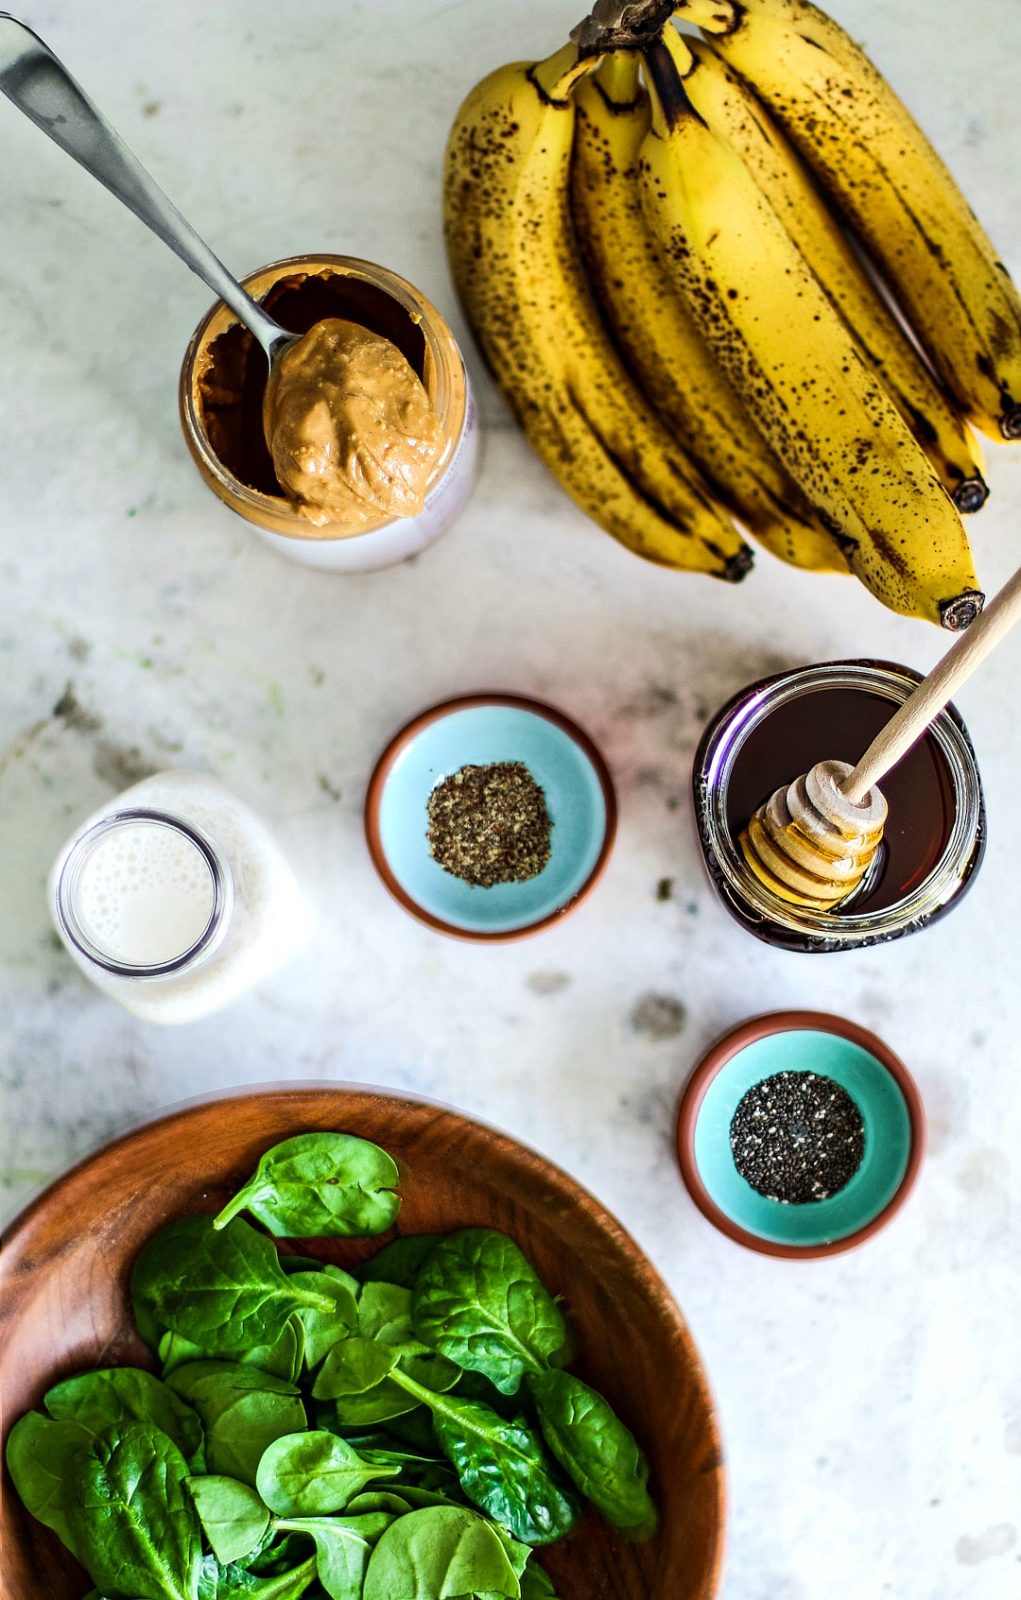 Peanut Butter Banana Spinach Smoothie ingredients on table.